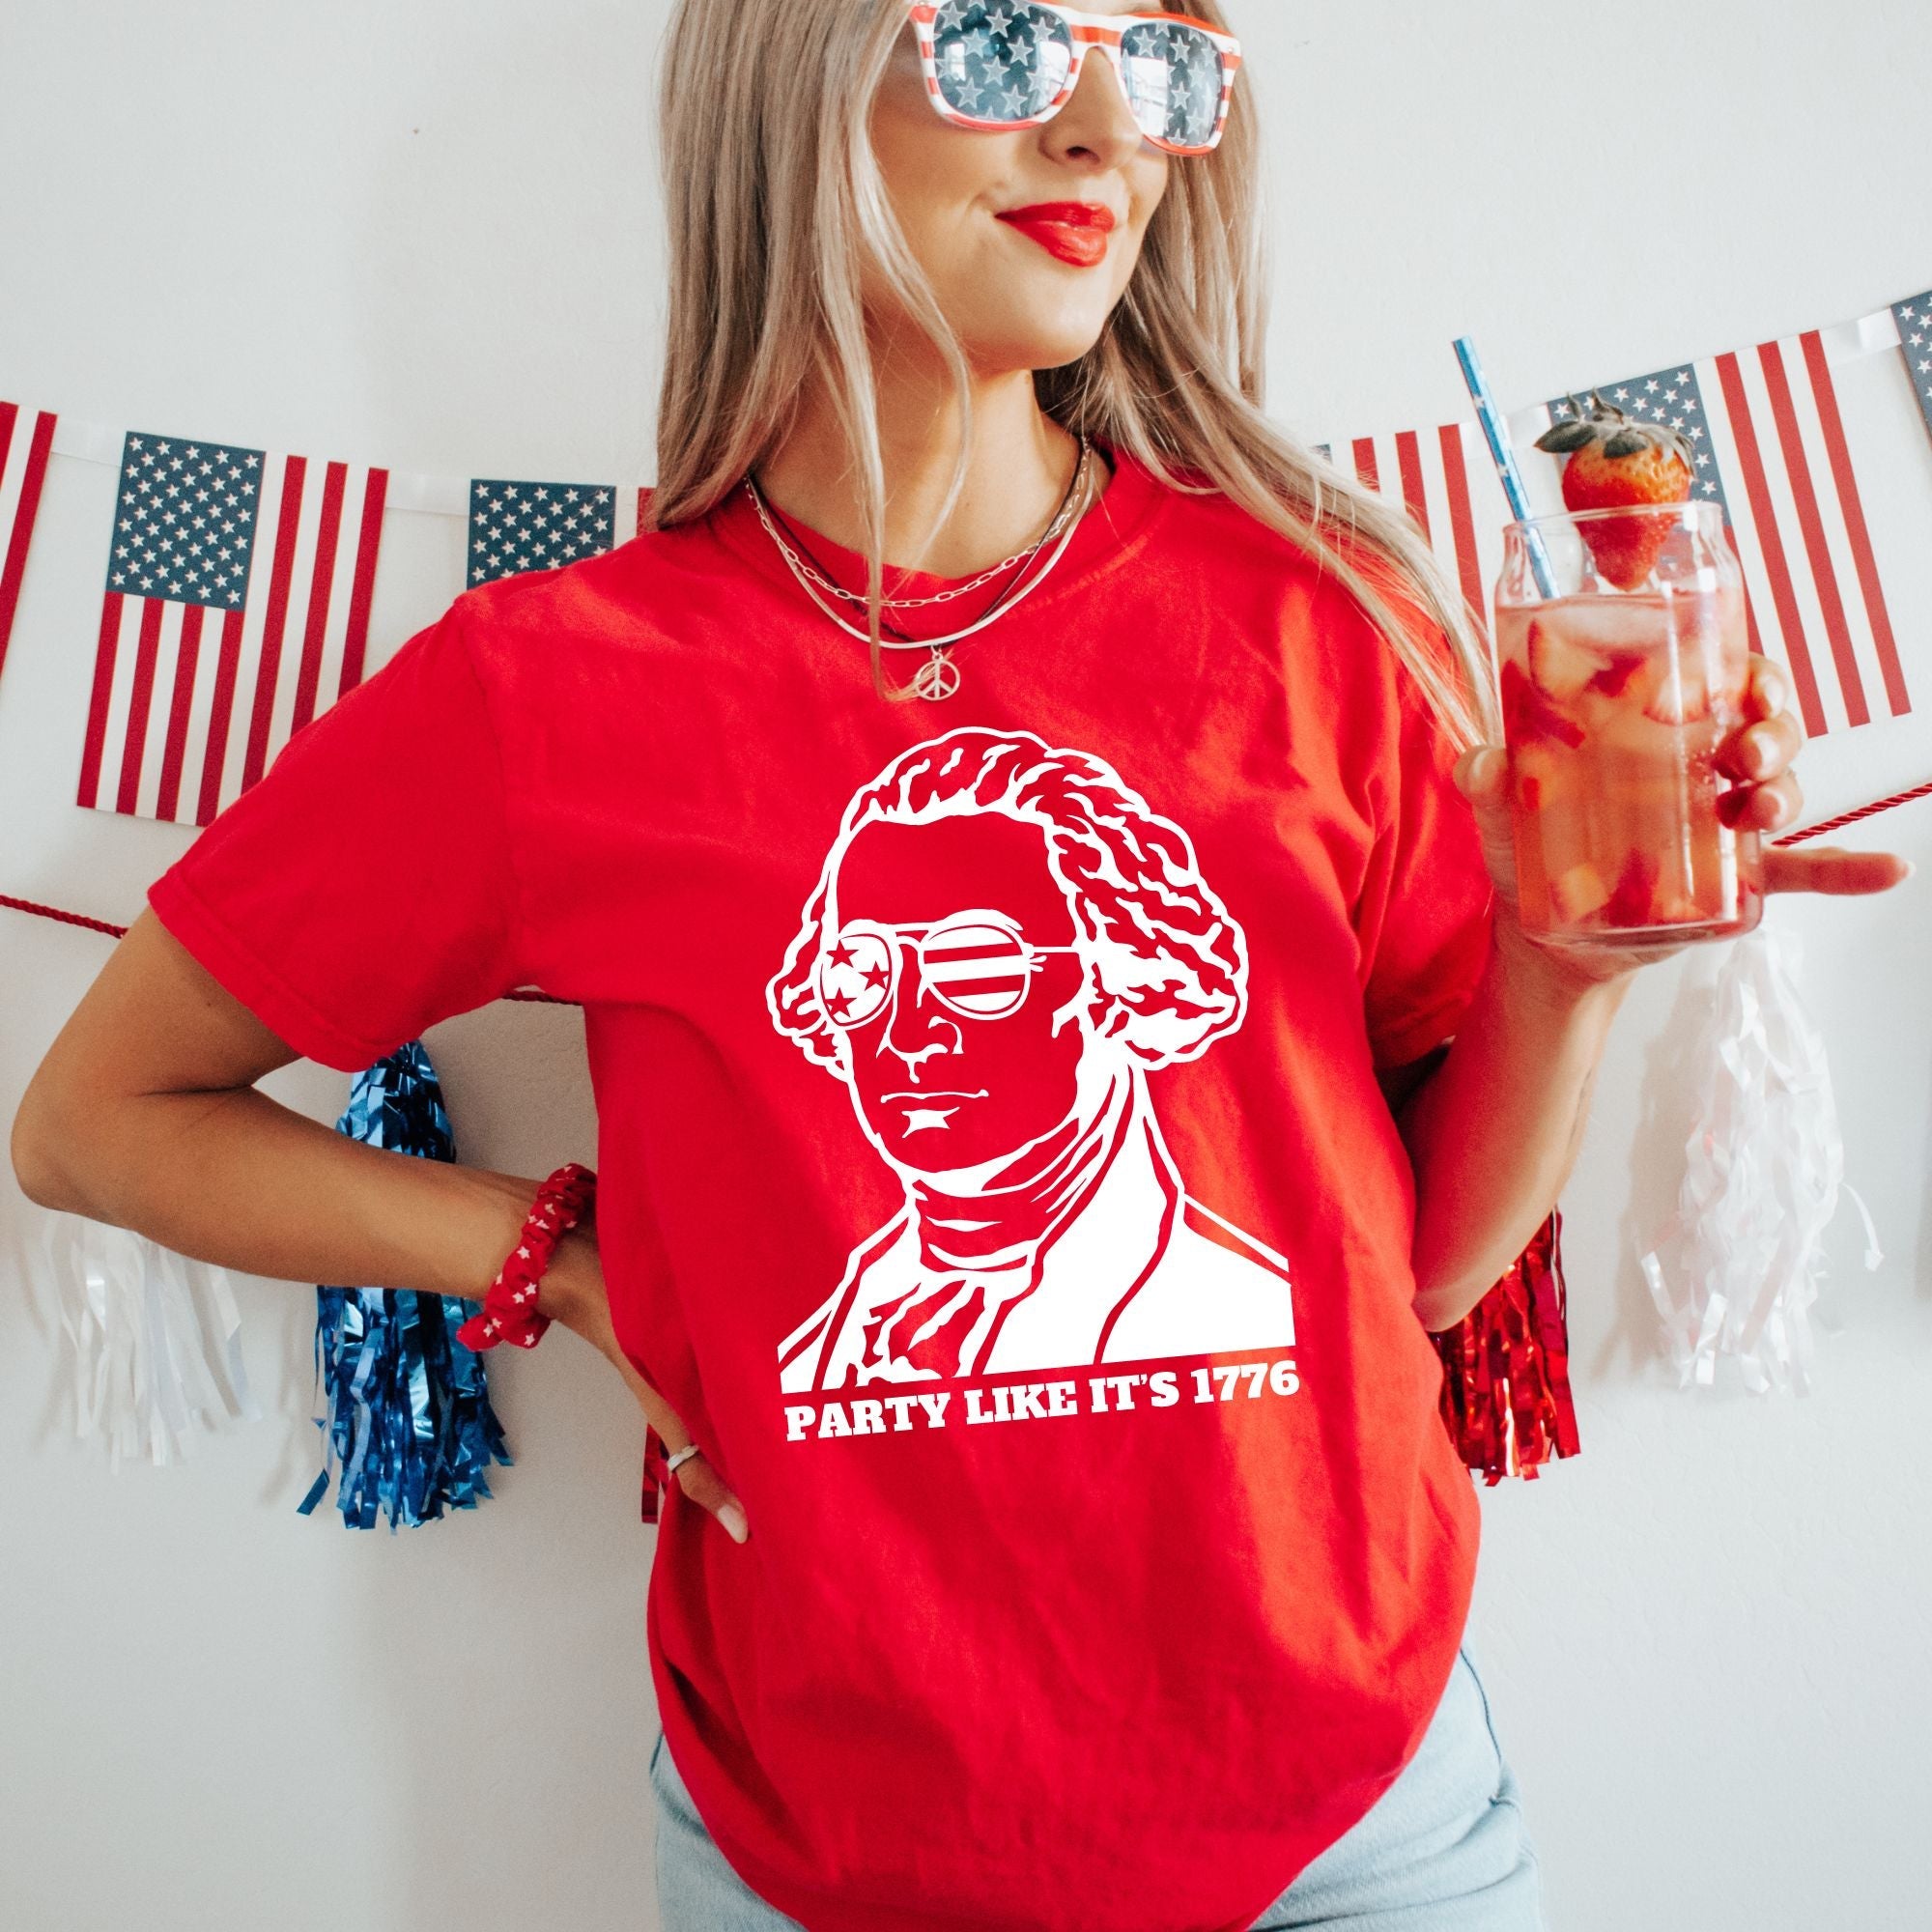 Party Like It's 1776 T Shirt for 4th Of July *UNISEX FIT*-Graphic Tees-208 Tees Wholesale, Idaho